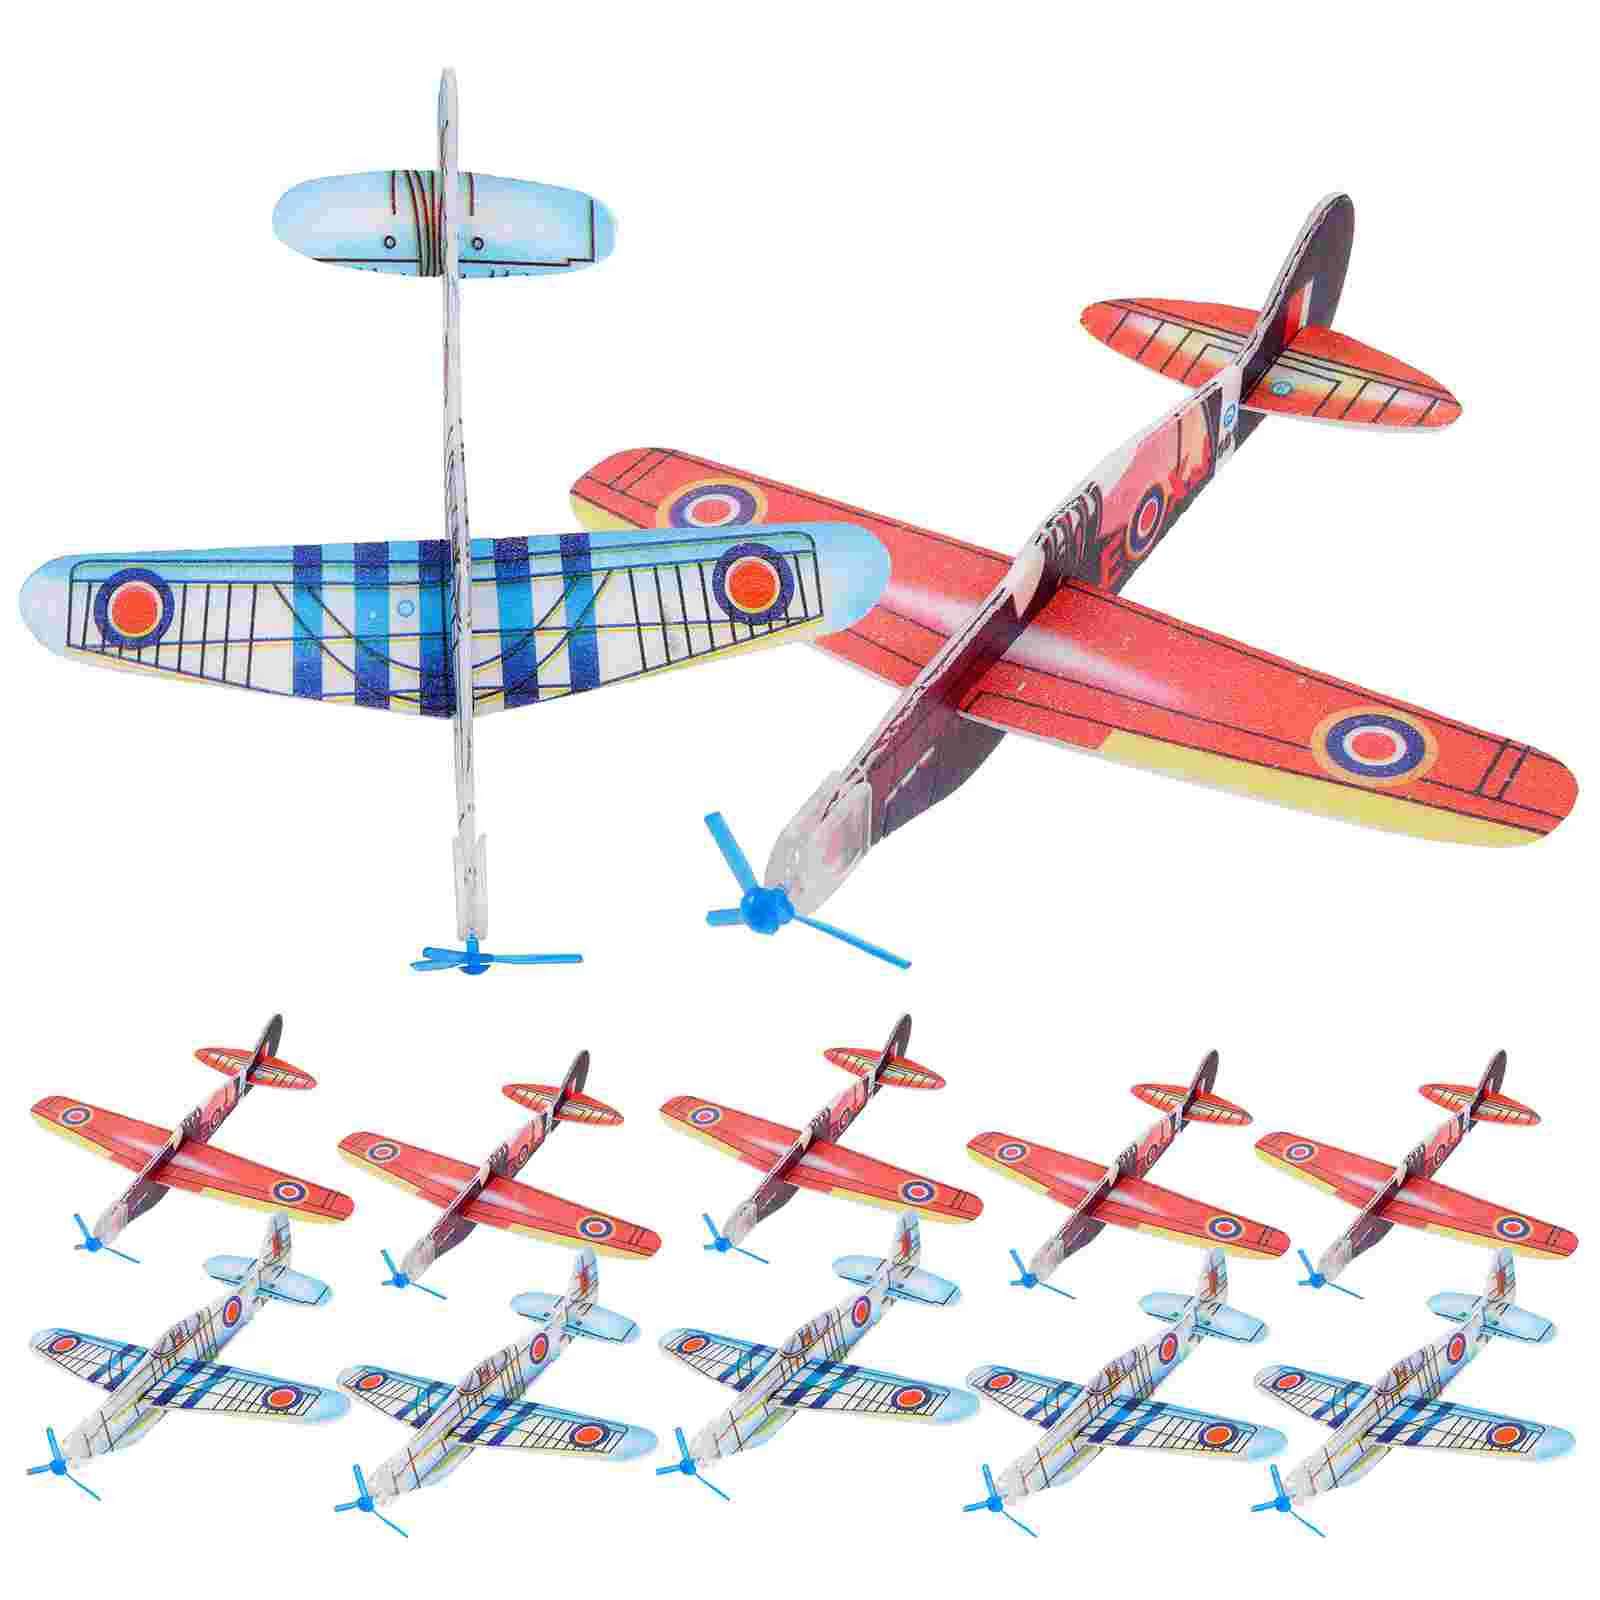 

36 Pcs Hand Throwing Foam Plane Funny Glider Planes Portable Foams Children’s Toys Creative Models for Game Airplane